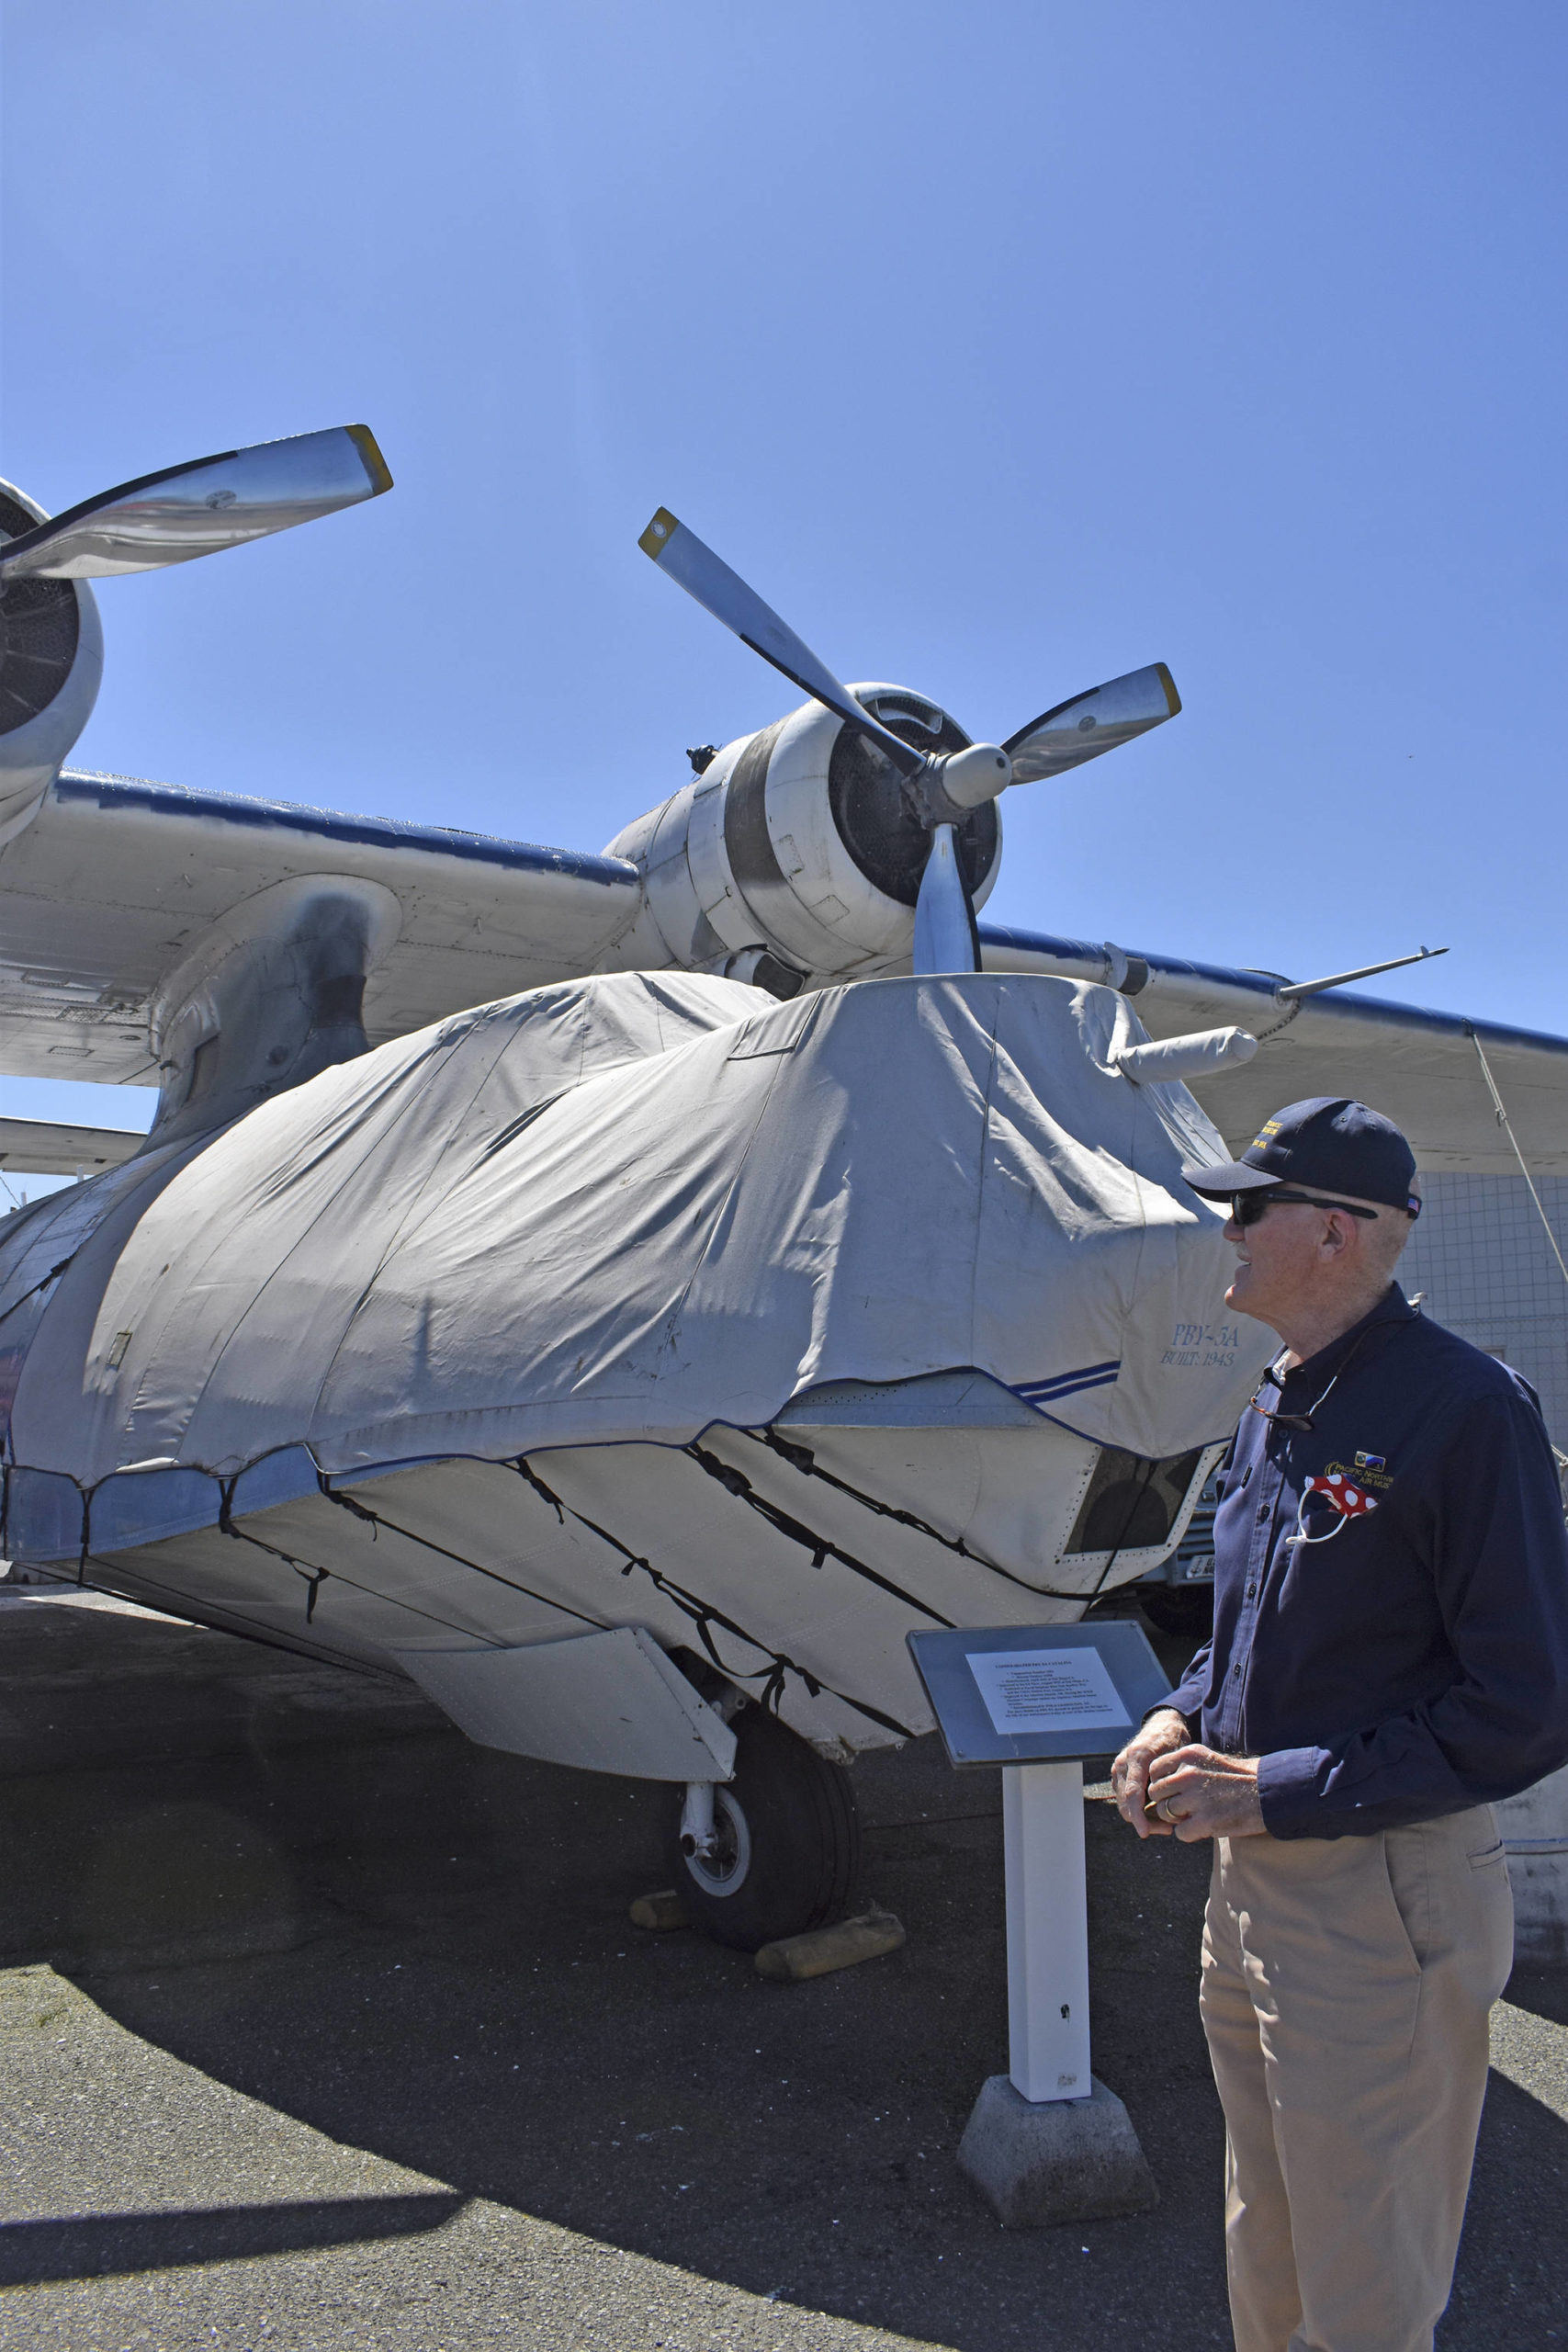 Pacific Northwest Naval Air Museum President Wil Shellenberger is hoping to find more volunteer docents so the museum can show off the PBY-5A Catalina aircraft’s interior to the public. Photo by Emily Gilbert/Whidbey News-Times.